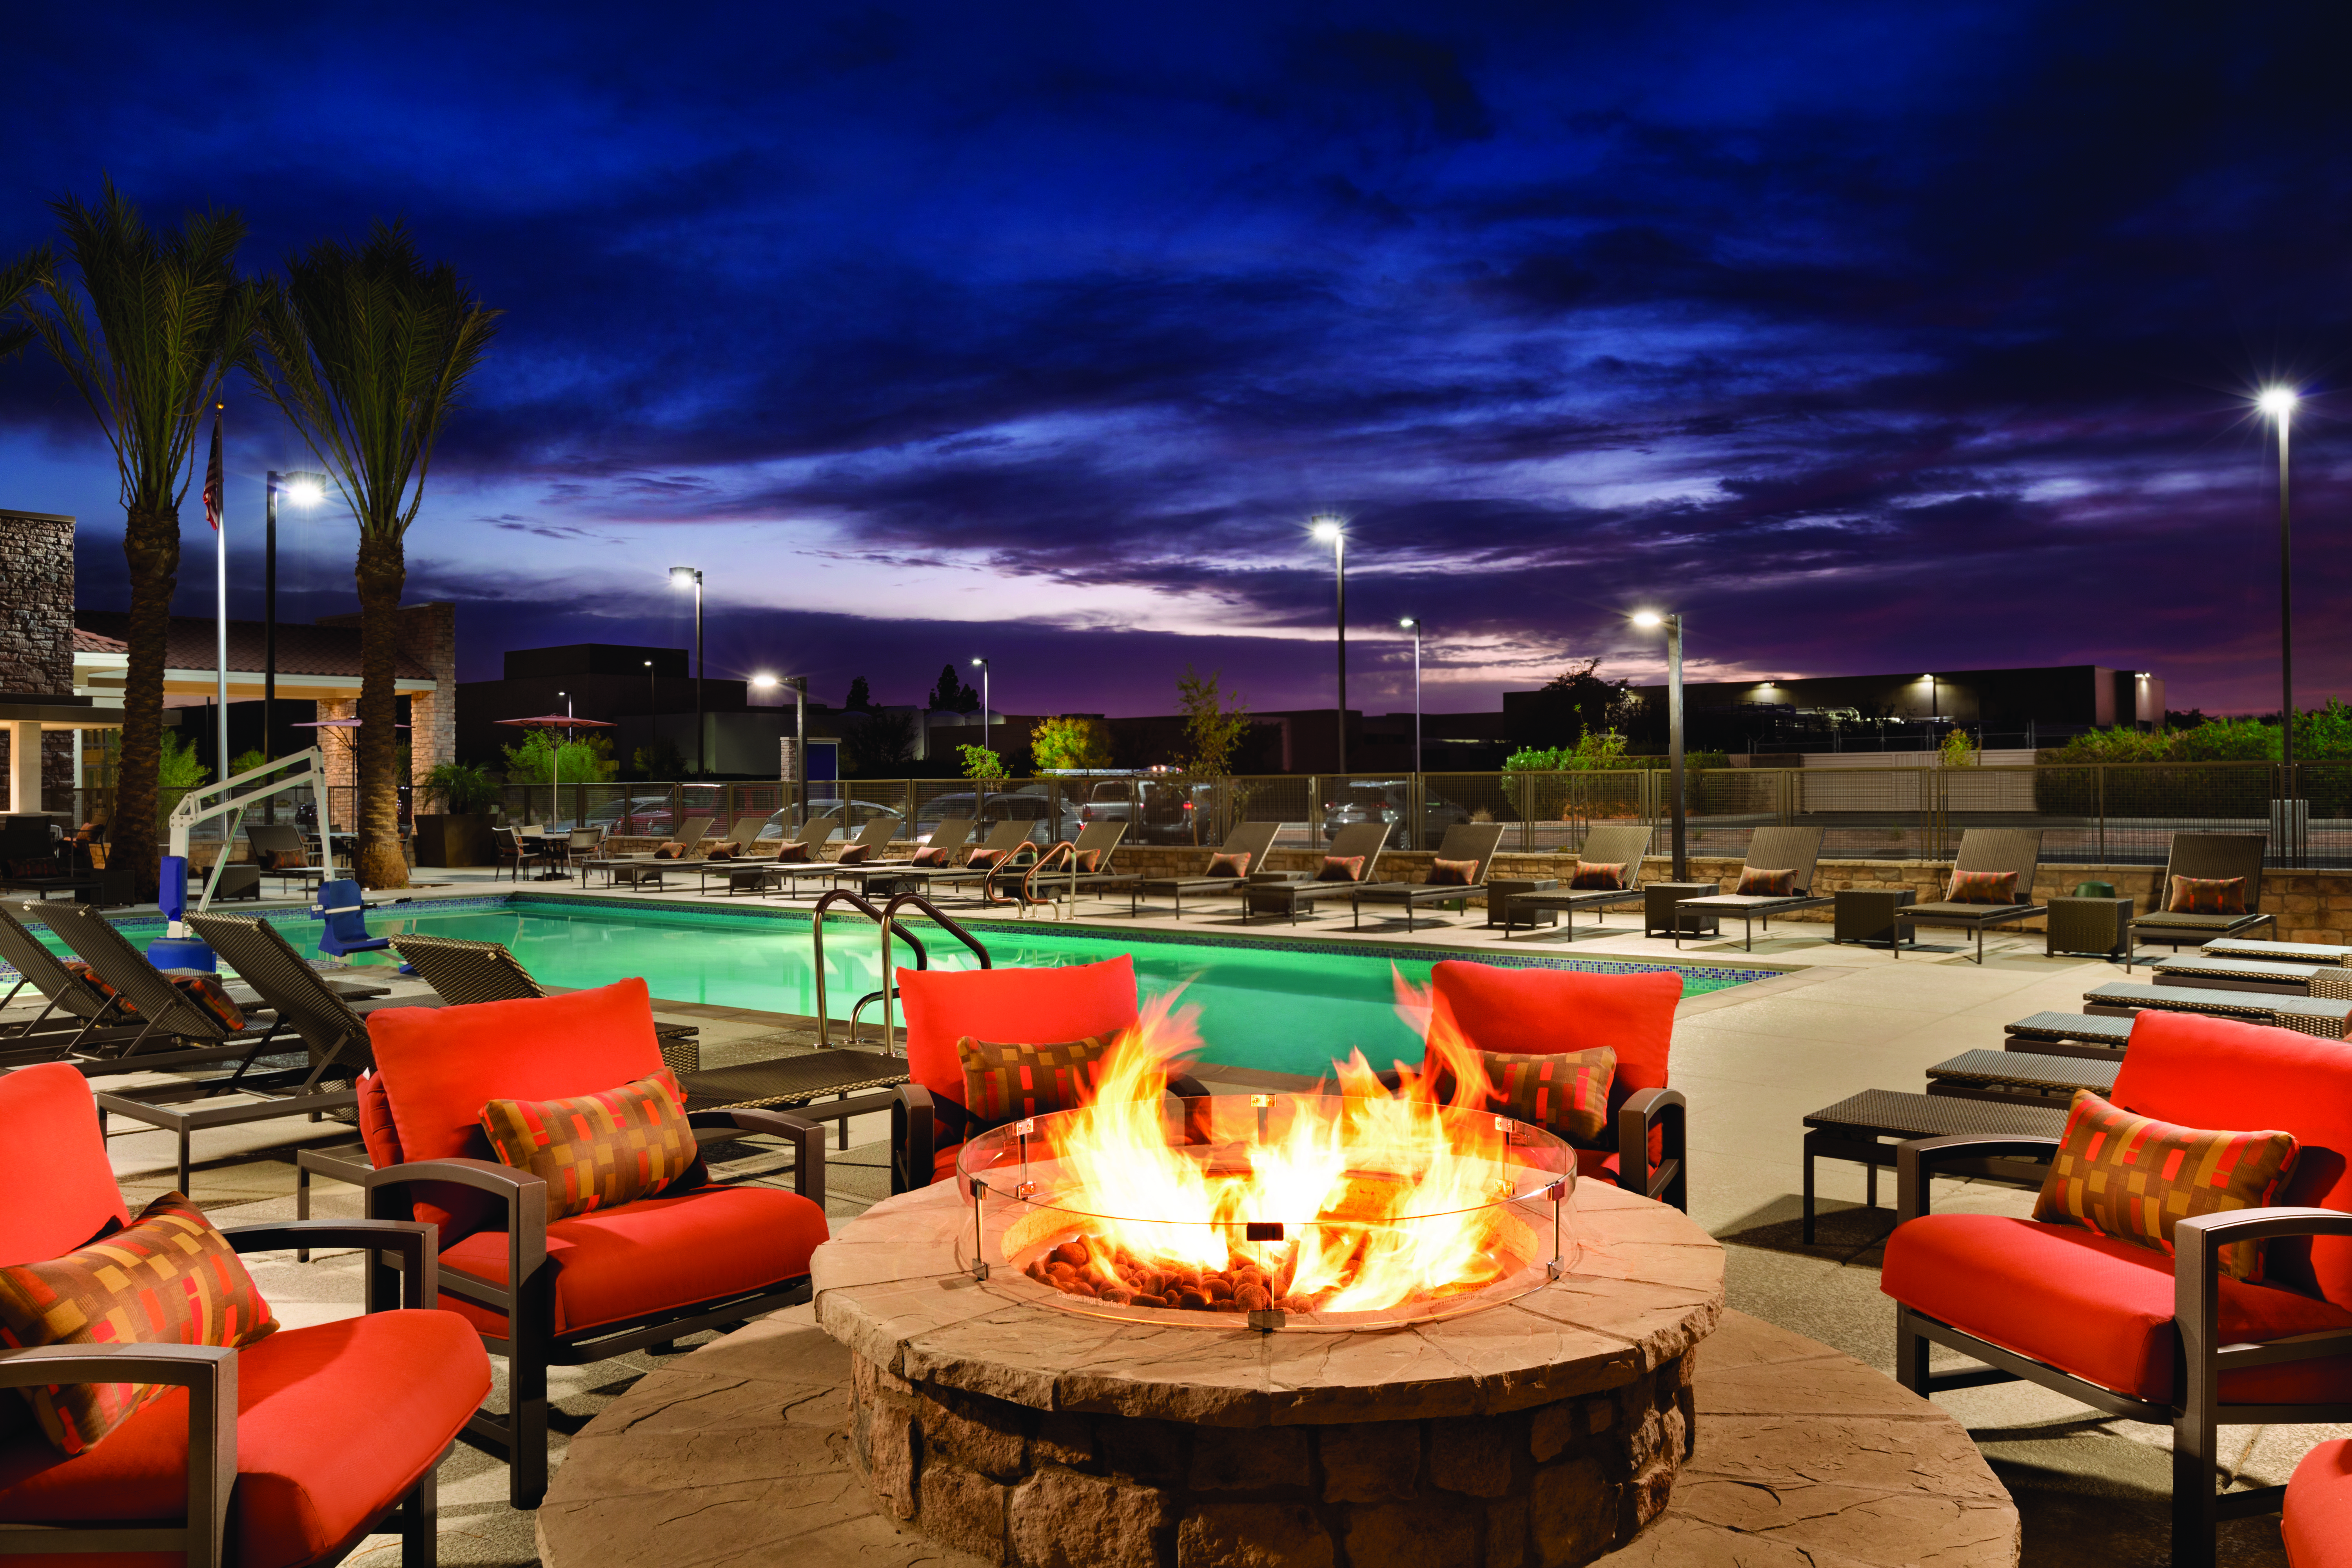 Outdoor Firepit with Armchairs next to Outdoor Pool at Dusk